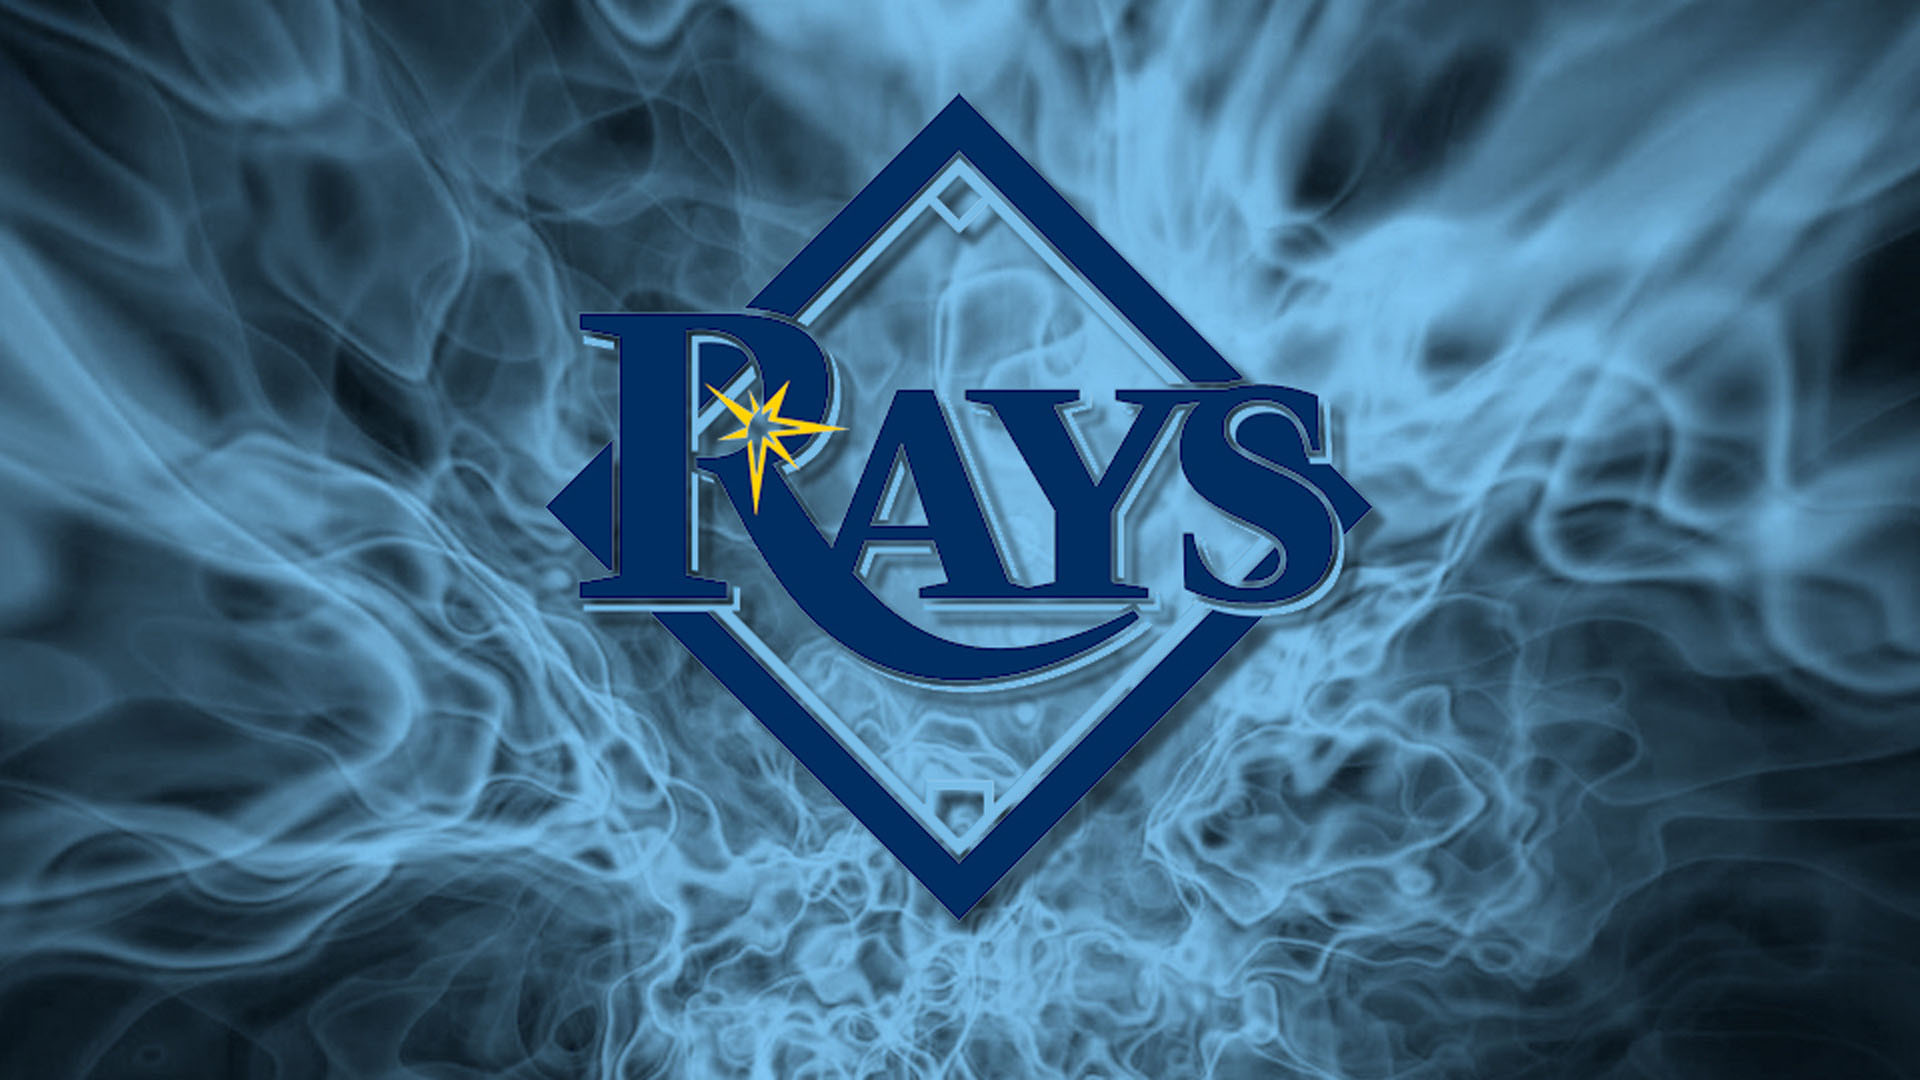 Tampa Bay Rays Wallpaper And Background Image